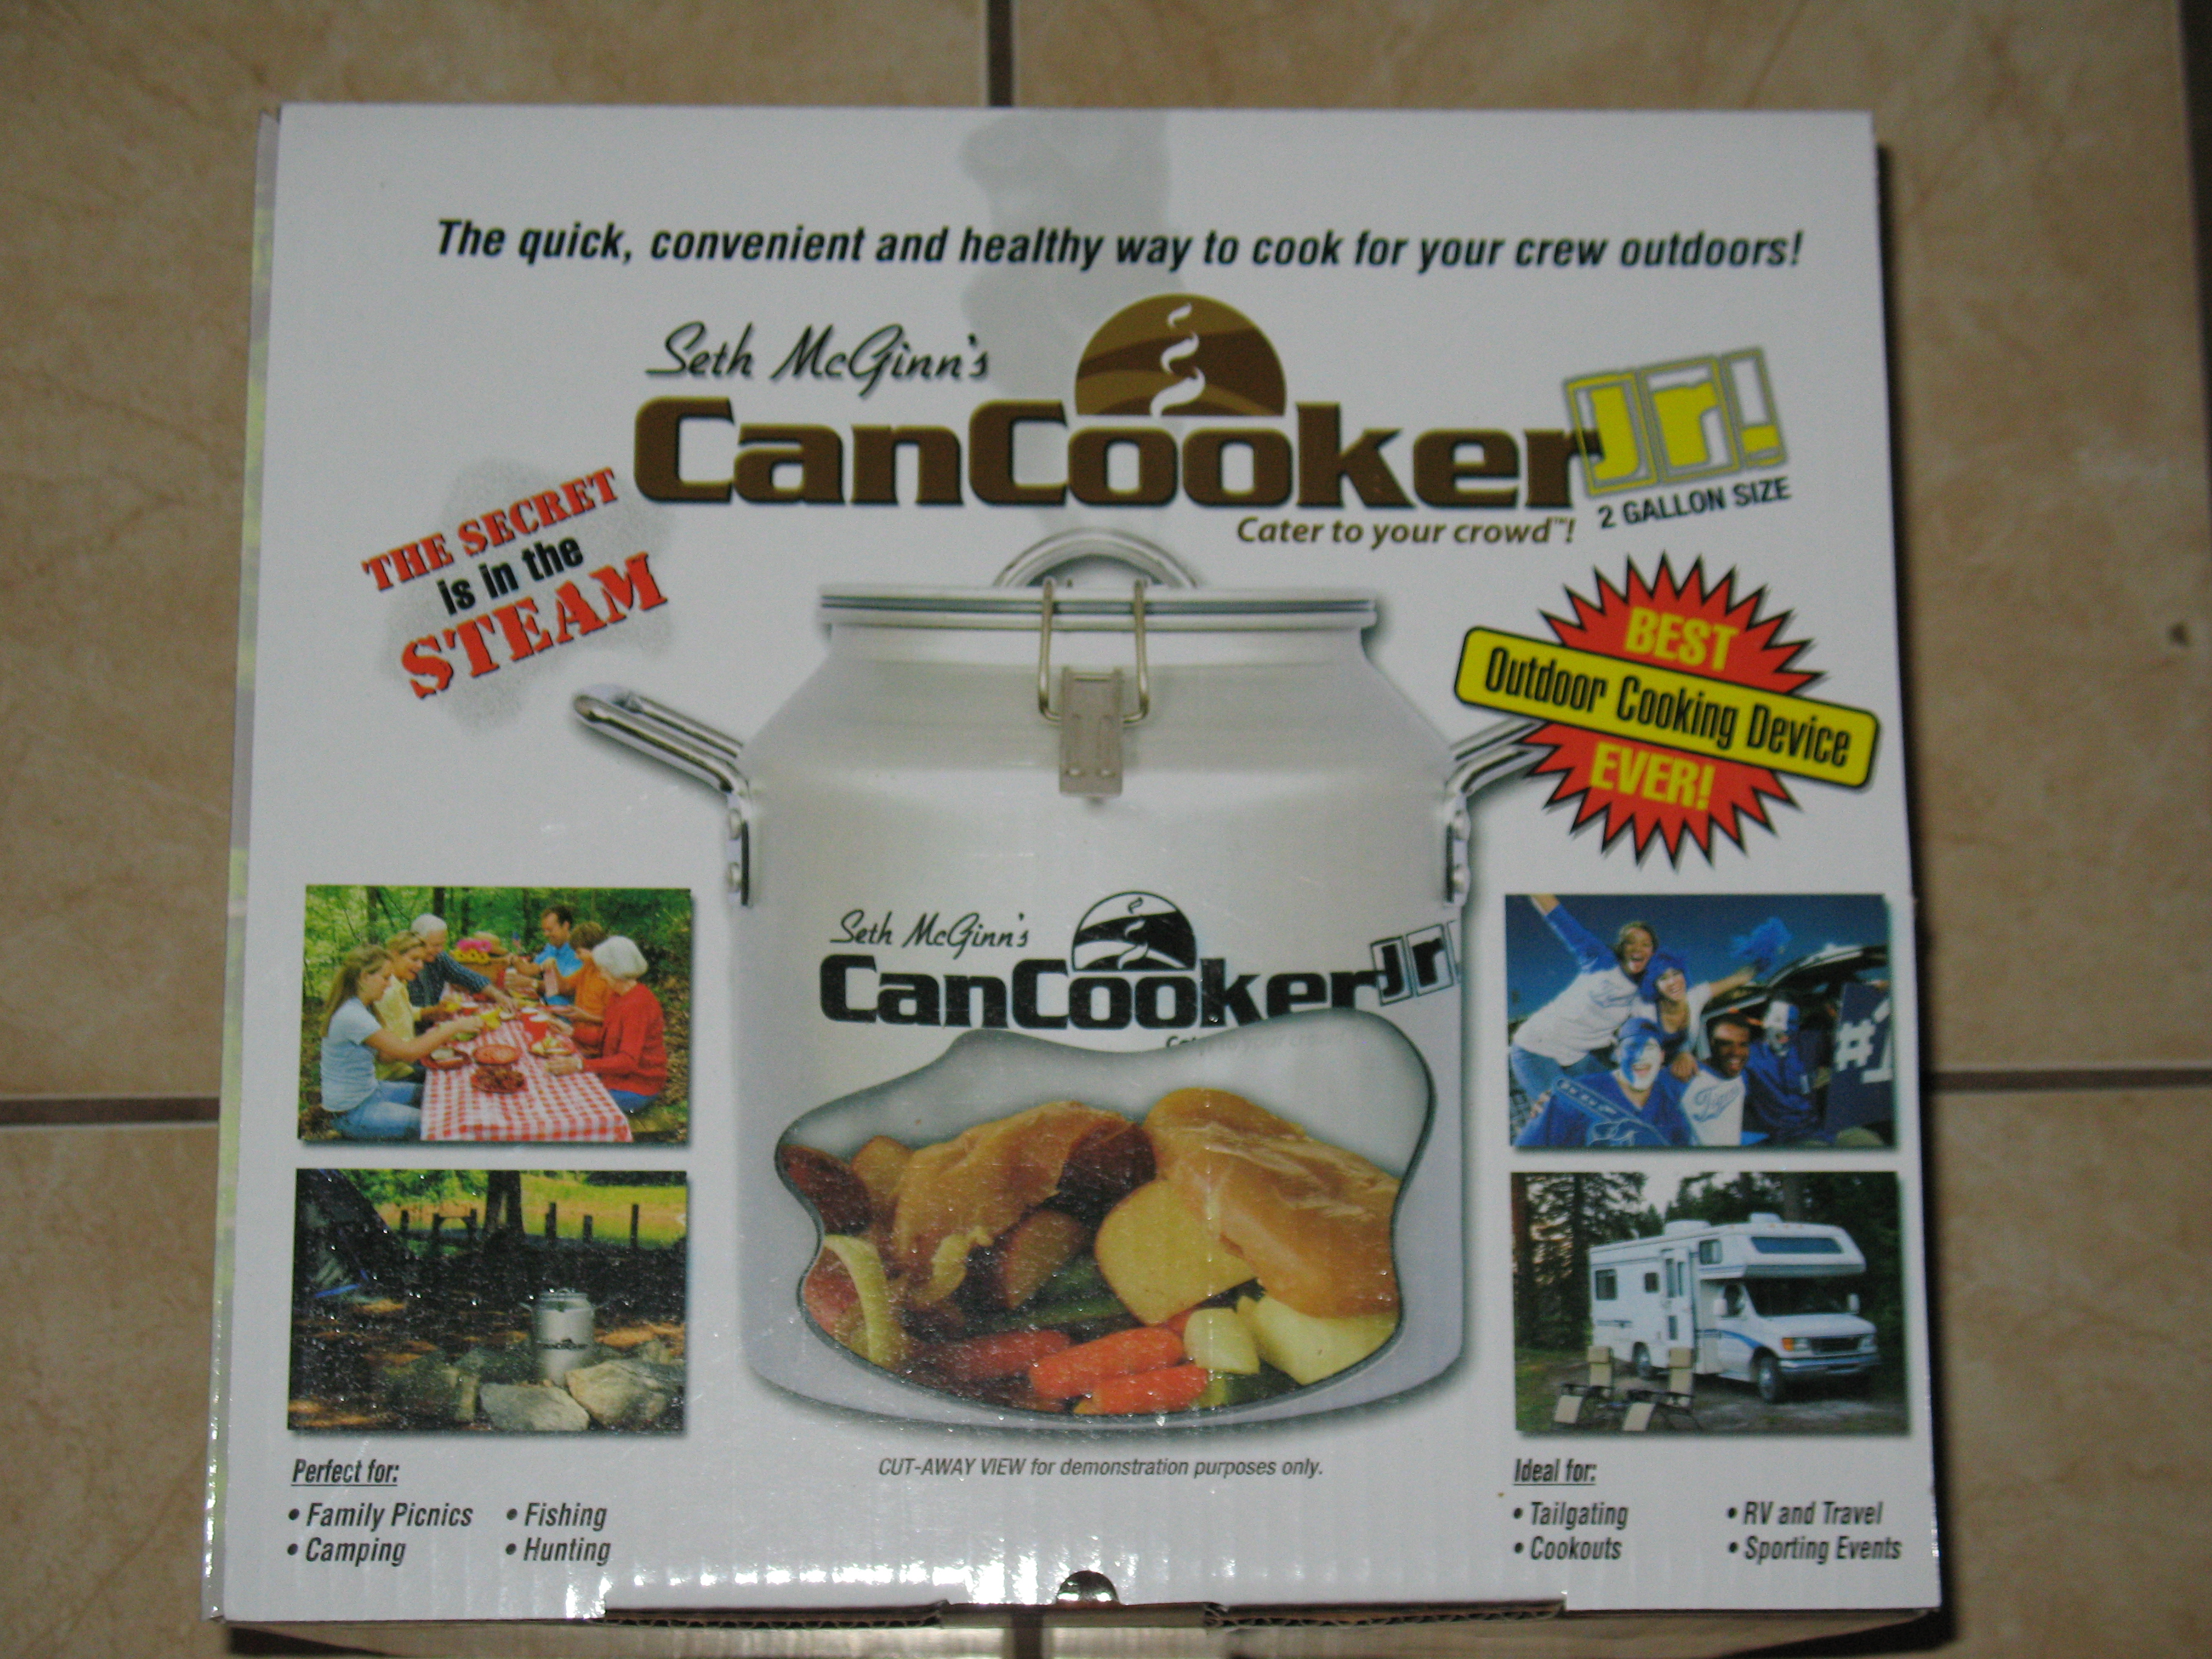 Cook Large Meals Without A Lot Of Work: The CanCooker